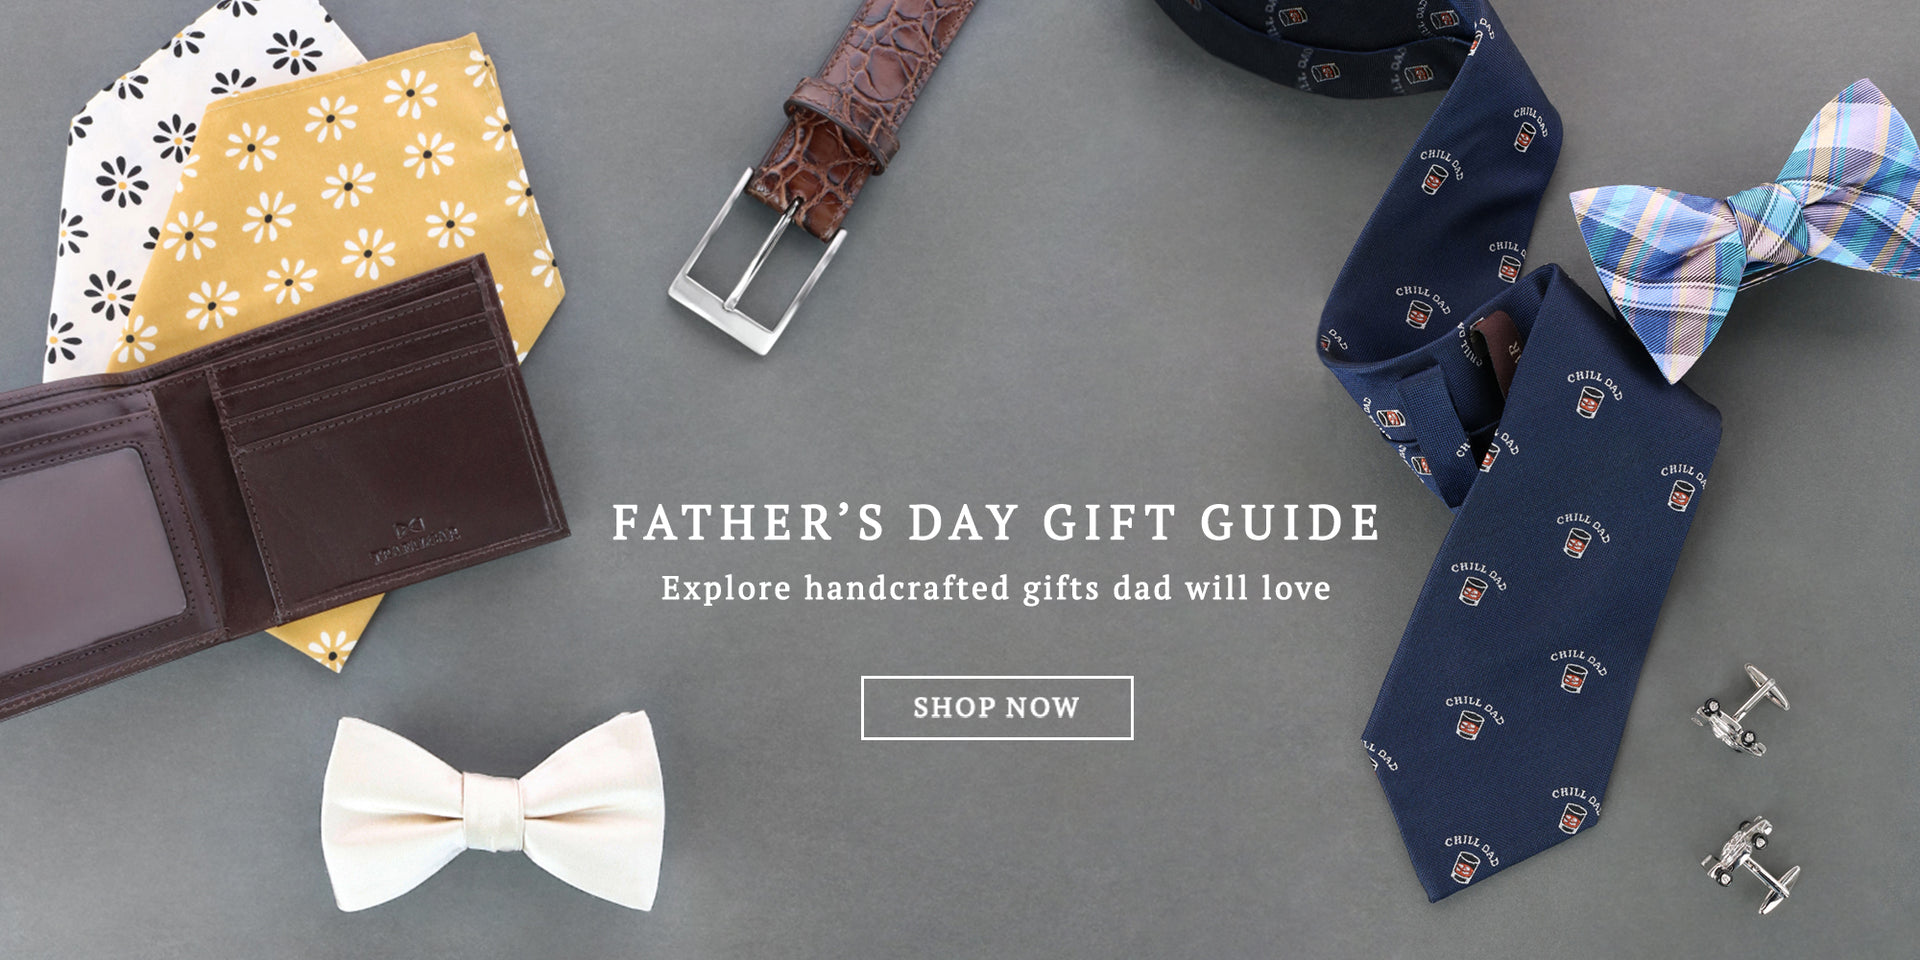 Father's Day gift guide, explore handcrafted gifts dad will love, shop now